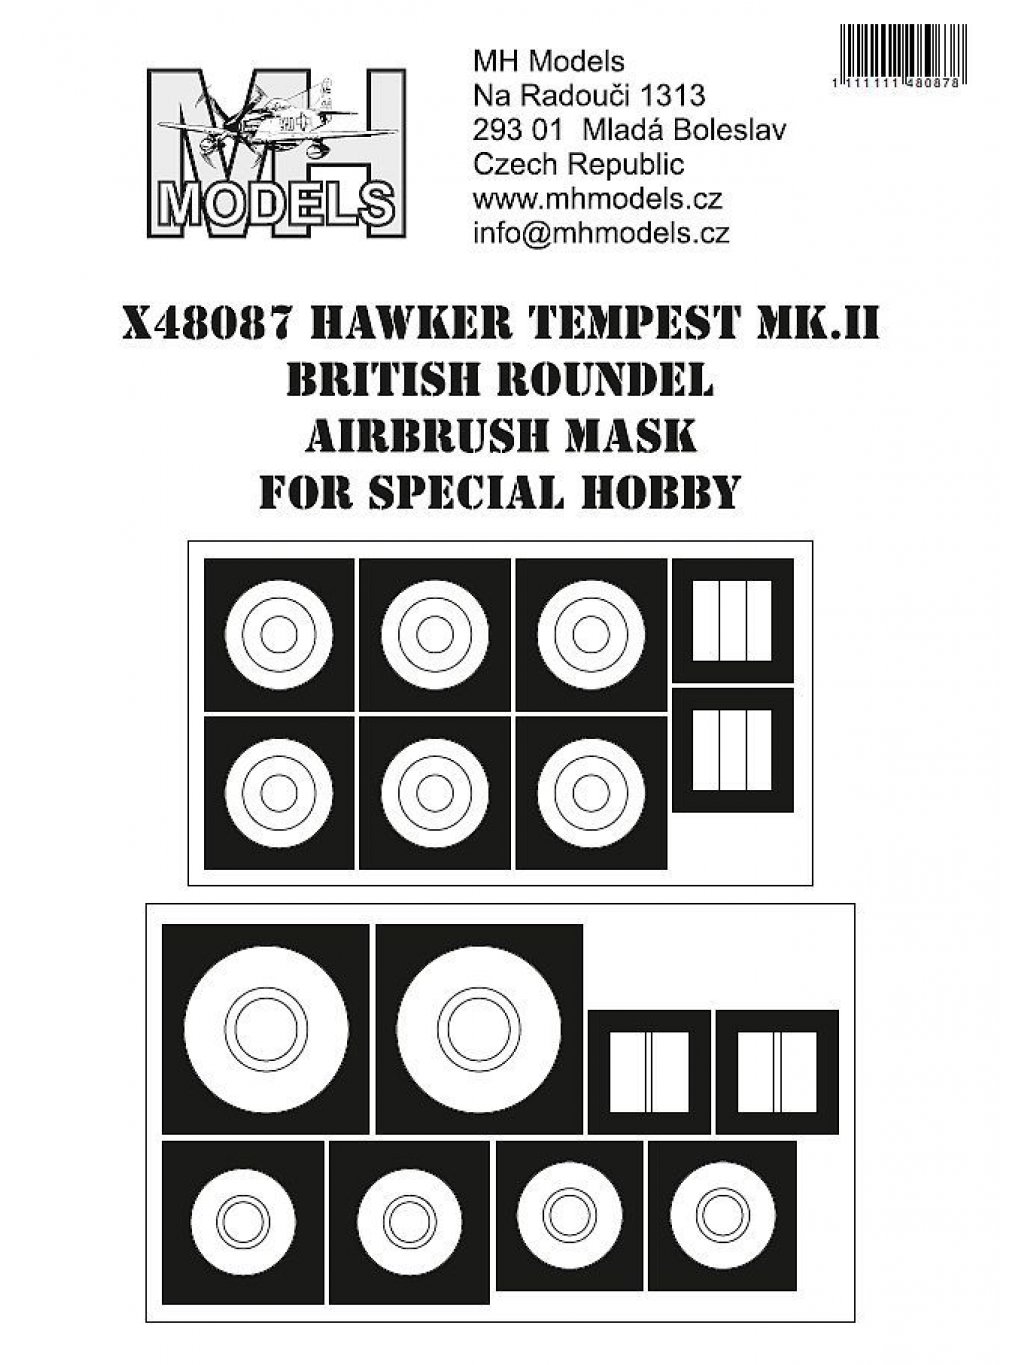 Hawker Tempest Mk.II British roundel airbrush mask for Special Hobby